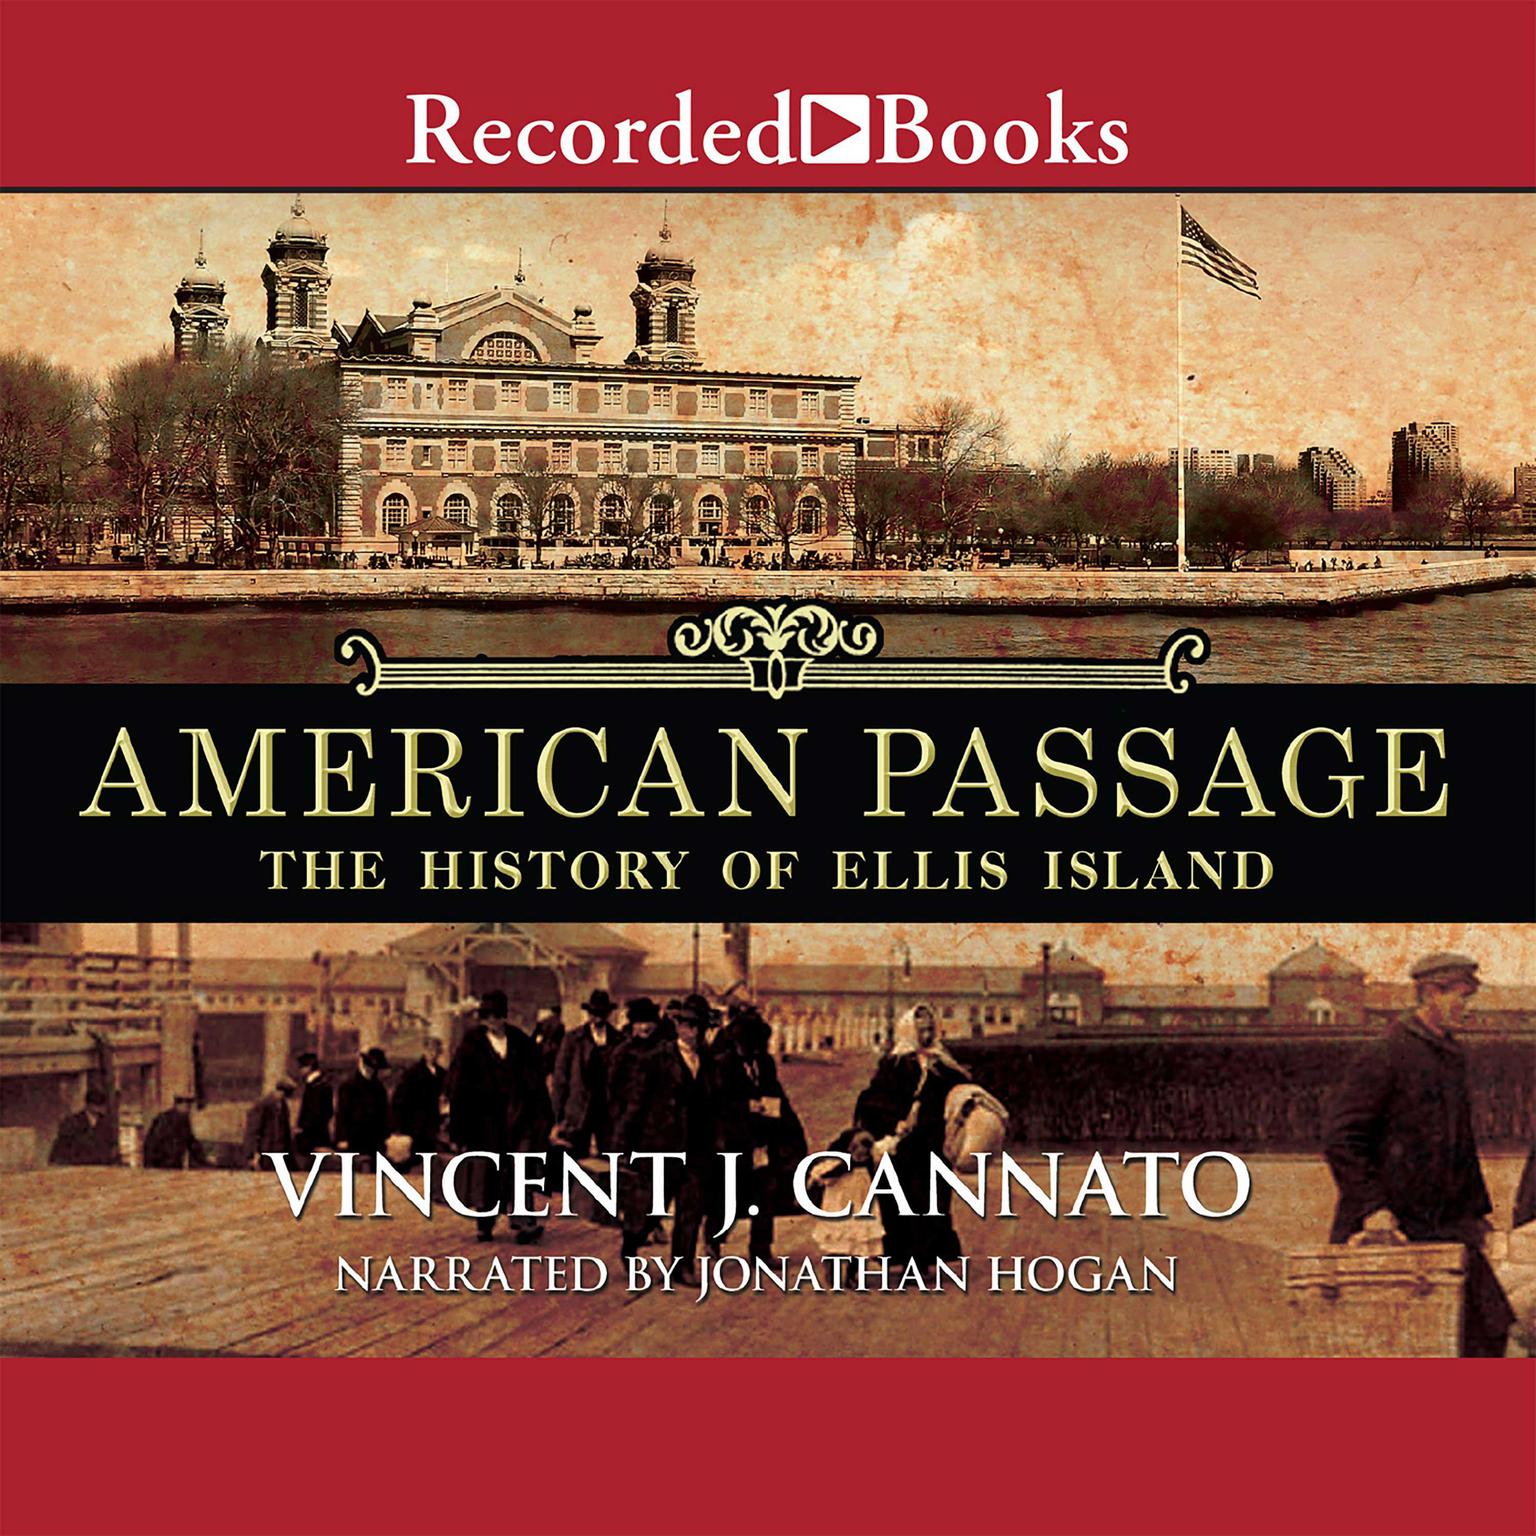 American Passage: The History of Ellis Island Audiobook, by Vincent J. Cannato